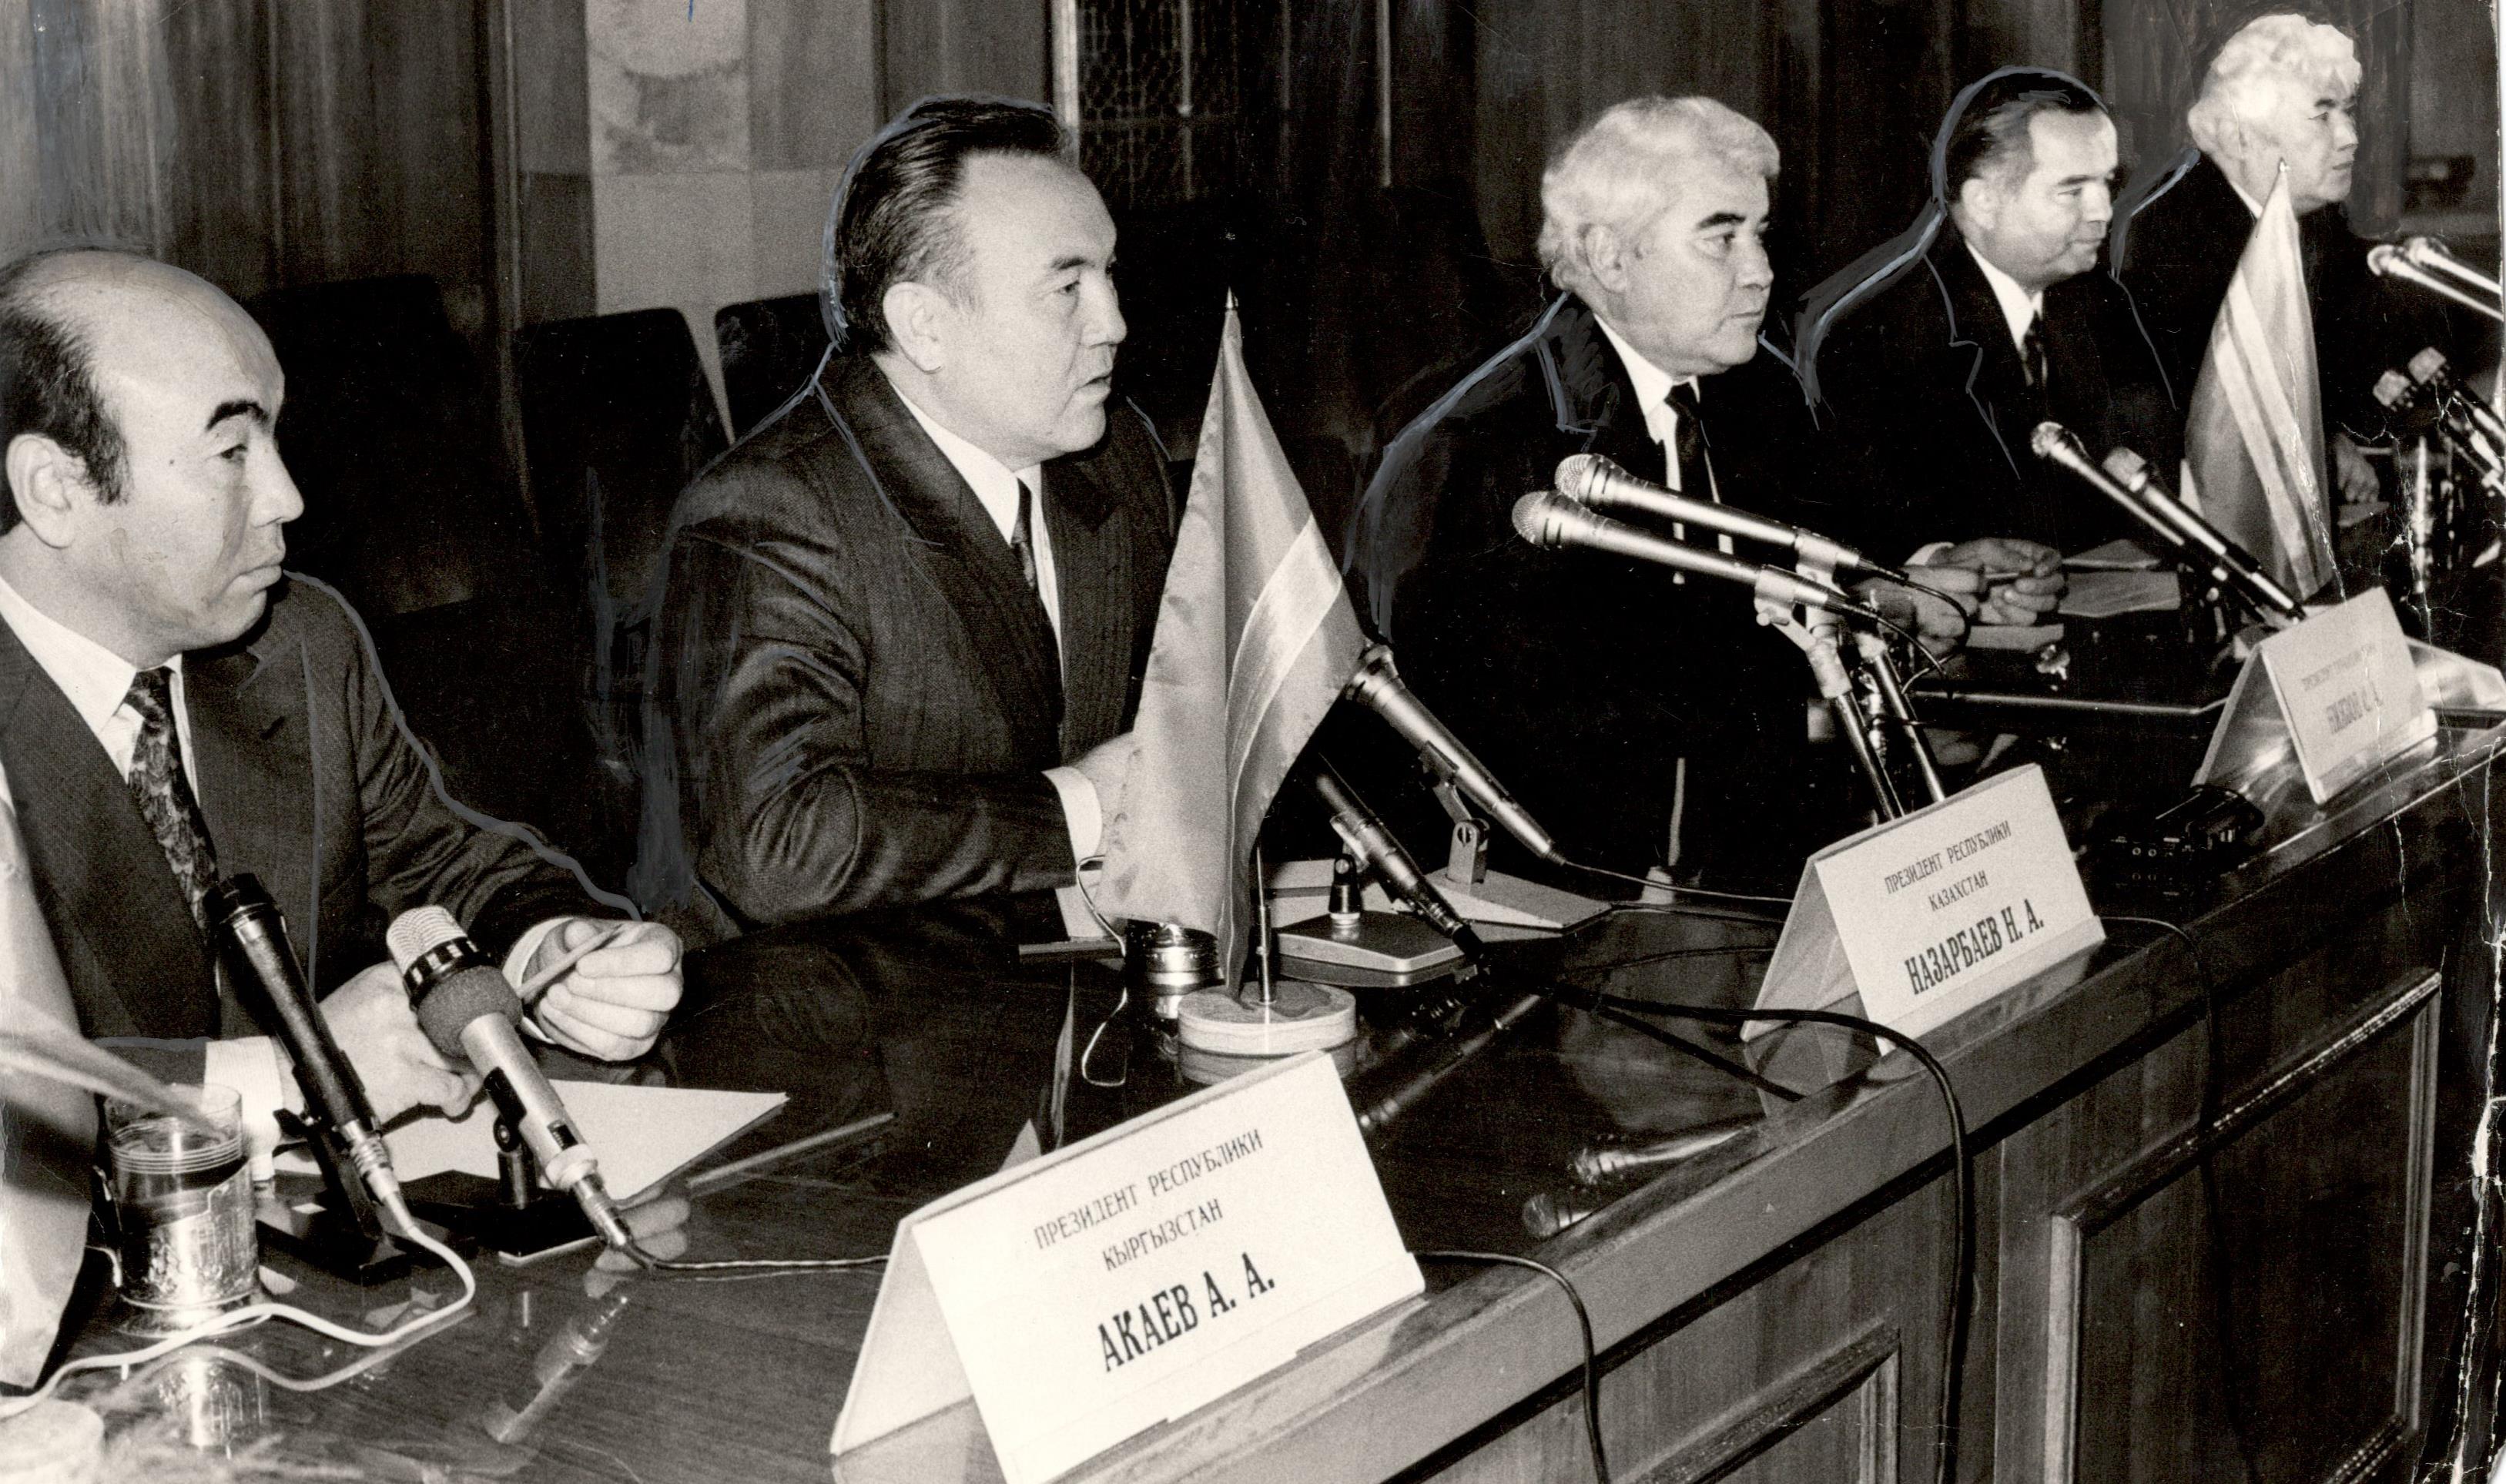 Nursultan Nazarbayev (center left), Saparmurat Niyazov (center), and Islam Karimov (center right) at a Commonwealth of Independent States meeting, 1991.